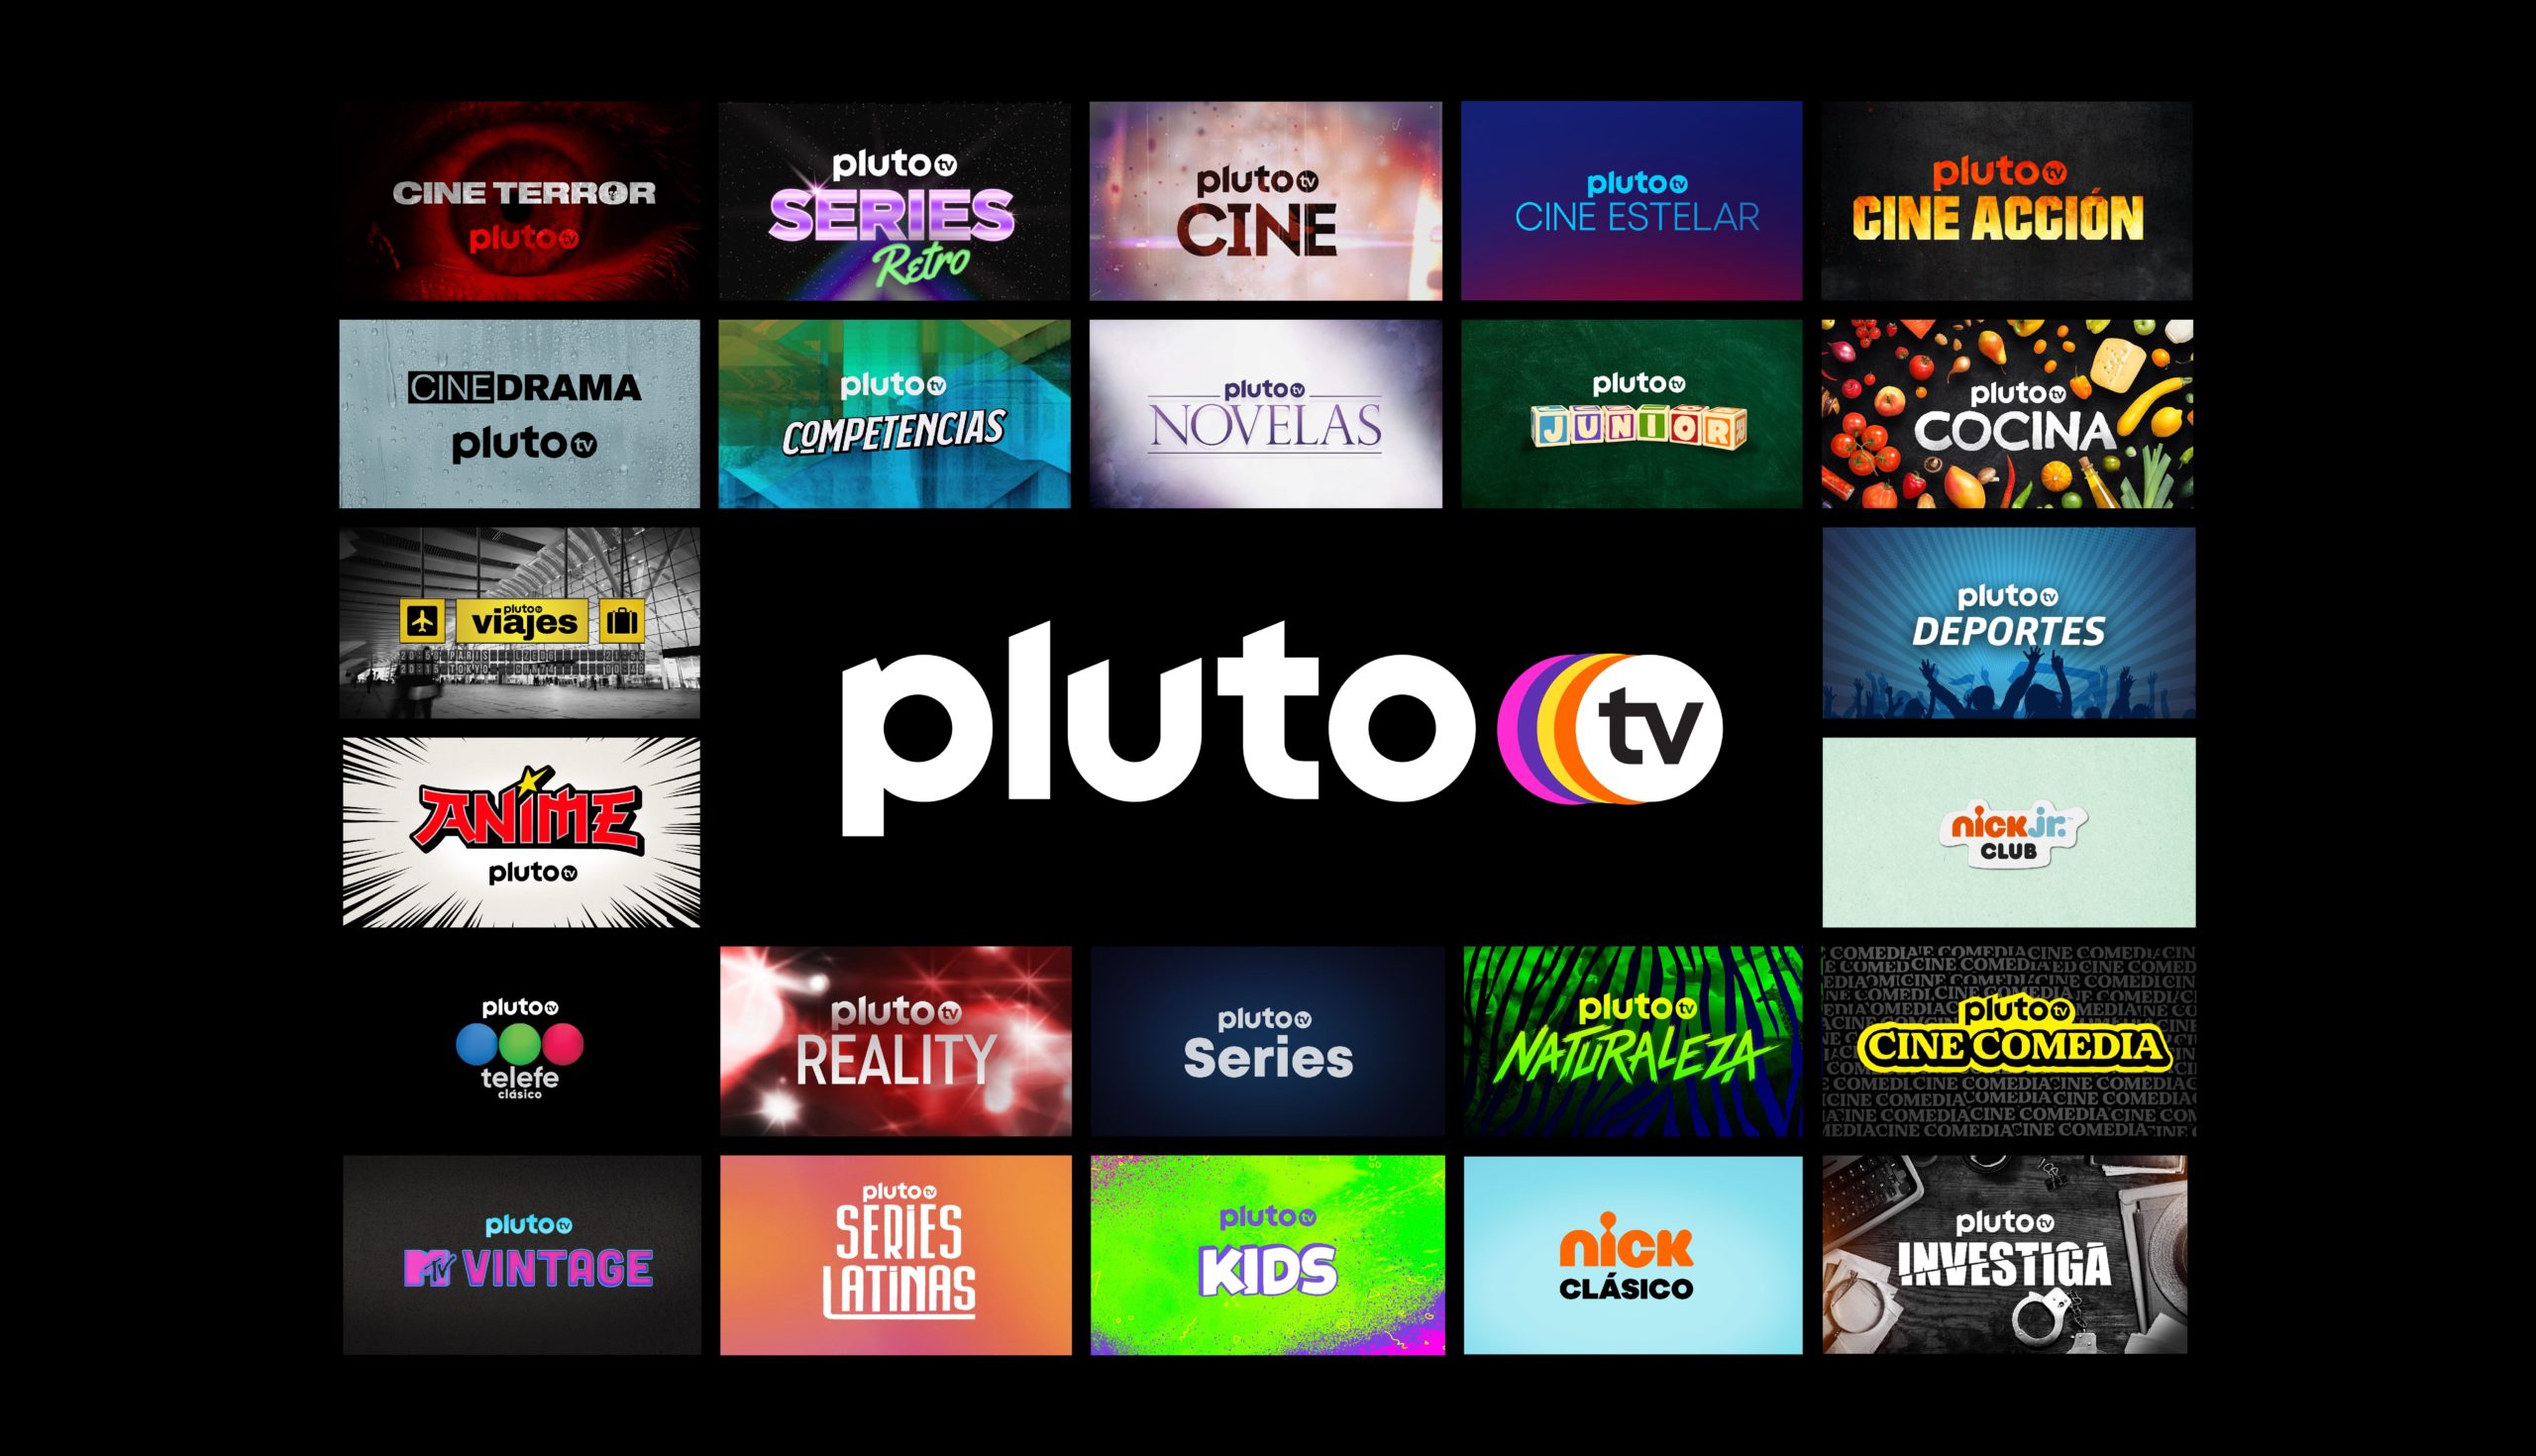 Pluto TV App Will Now Come Preloaded on Select Verizon Android Devices and More